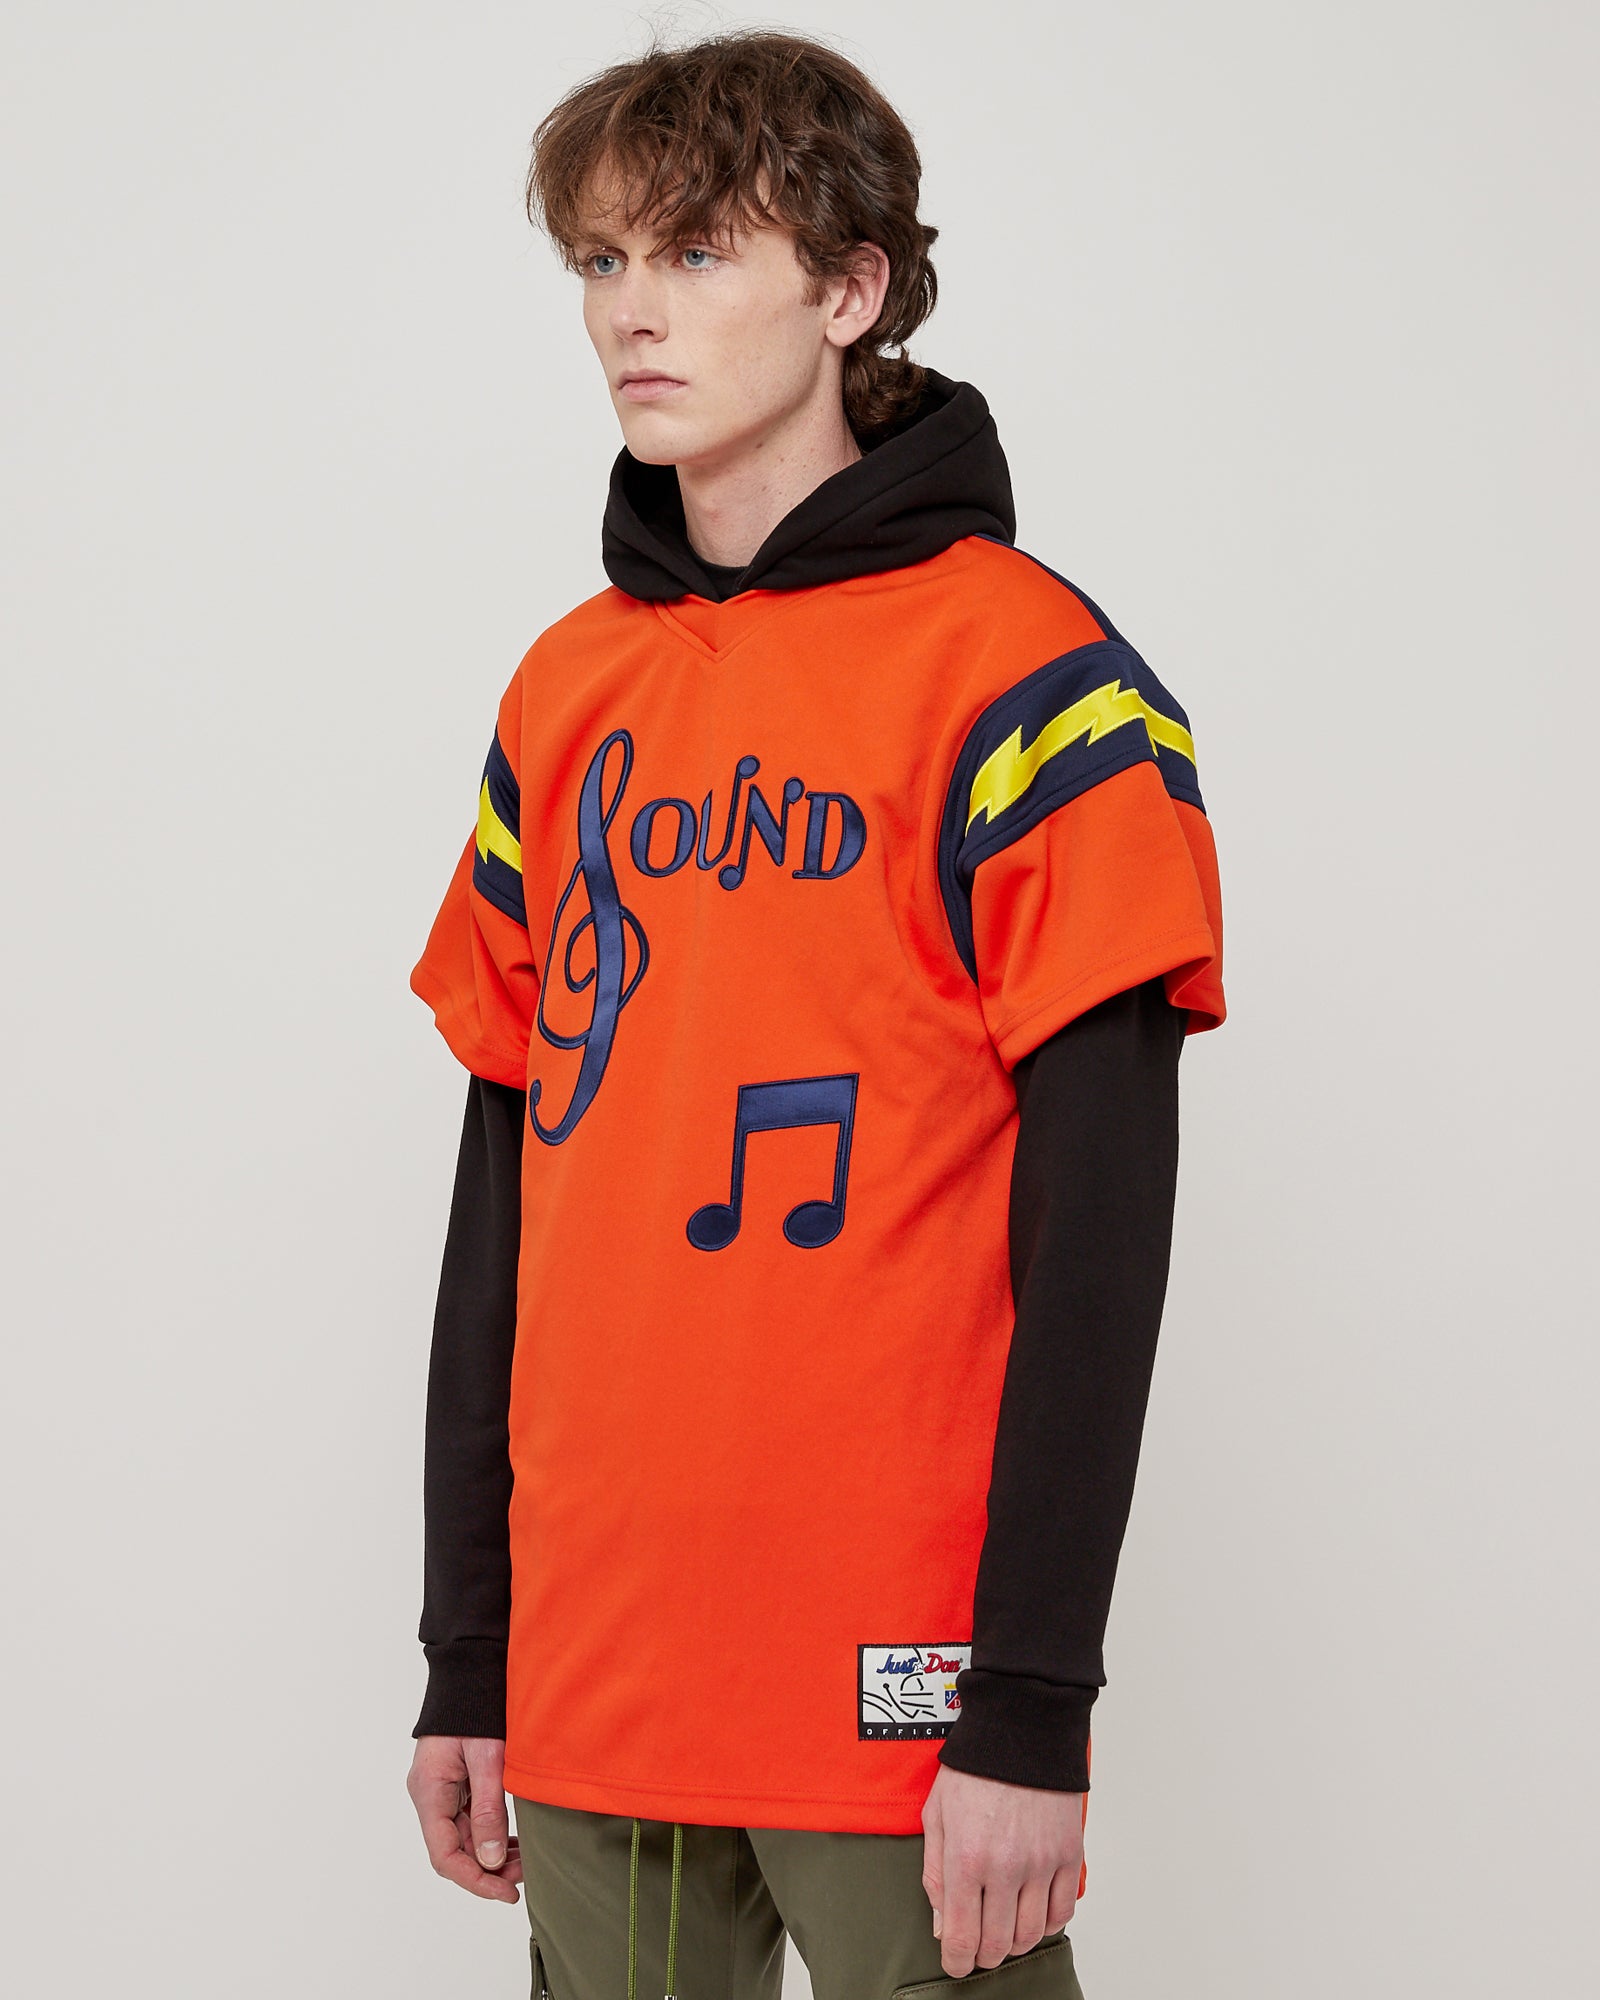 The Sound Football Jersey Hoodie in Orange